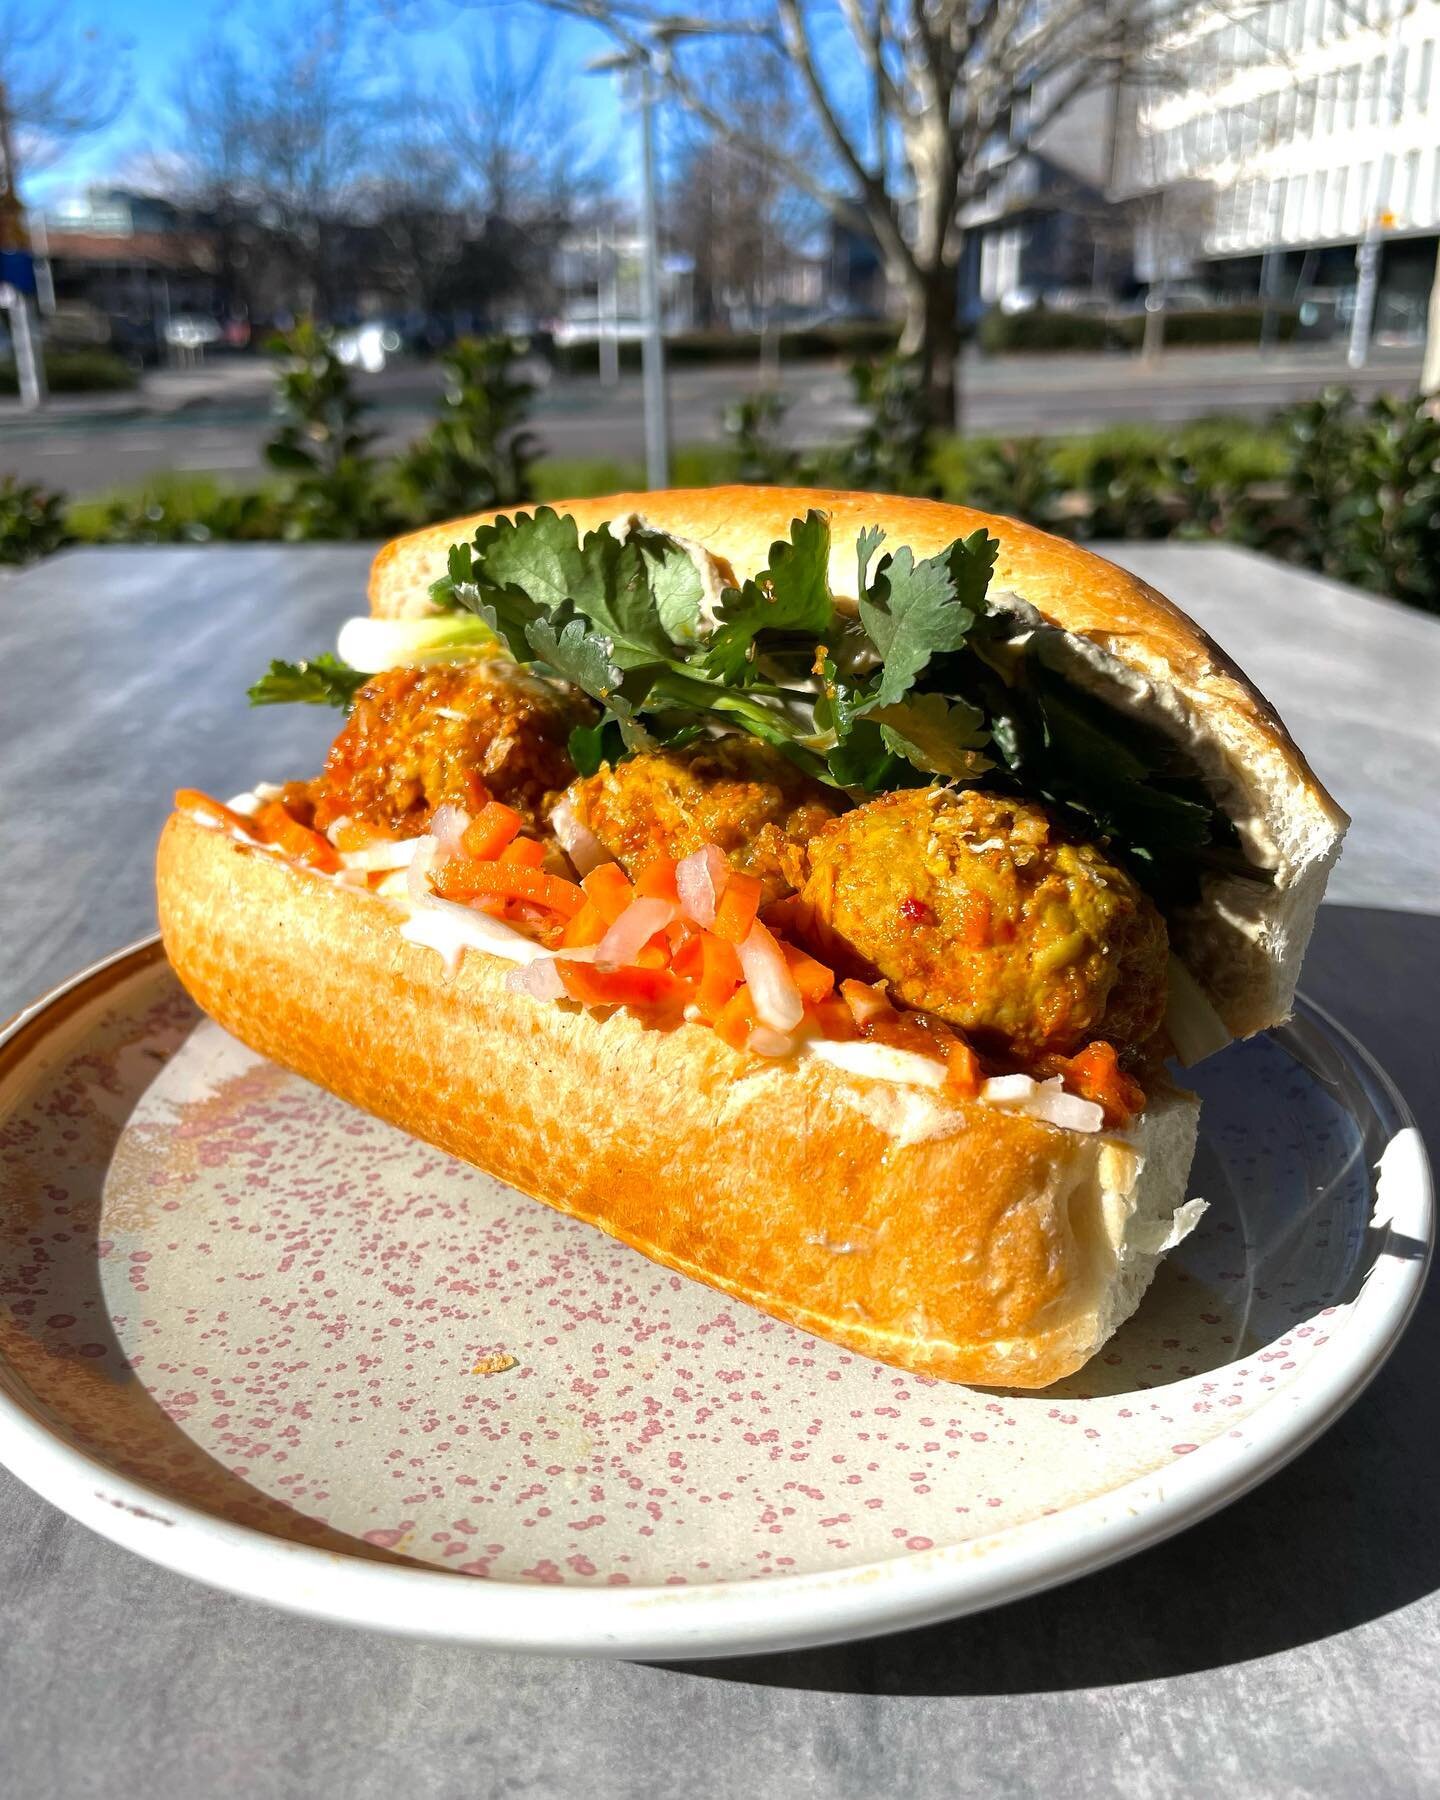 BANH MI XIU MAI

Pork and lemongrass meatballs in tomato sugo, in a banh mi with umami butter, mayo, parfait, pickles, herbs and fried garlic. Available for takeaway at lunch this week (until sold out).